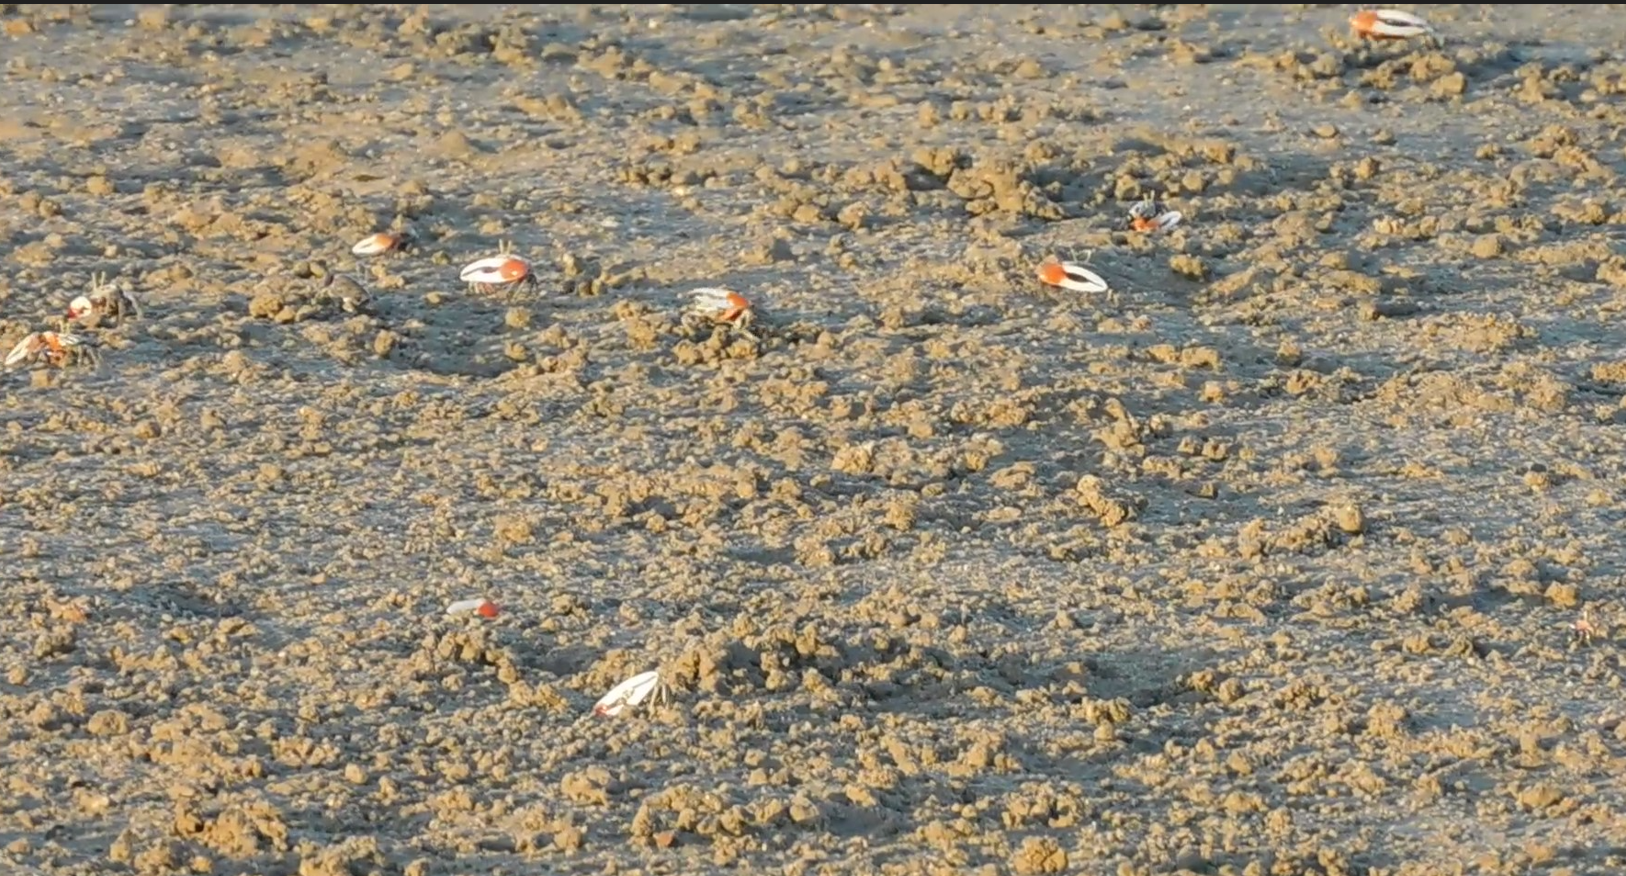 Fiddler crabs aggregation in the sand, Photo by Maria Zann